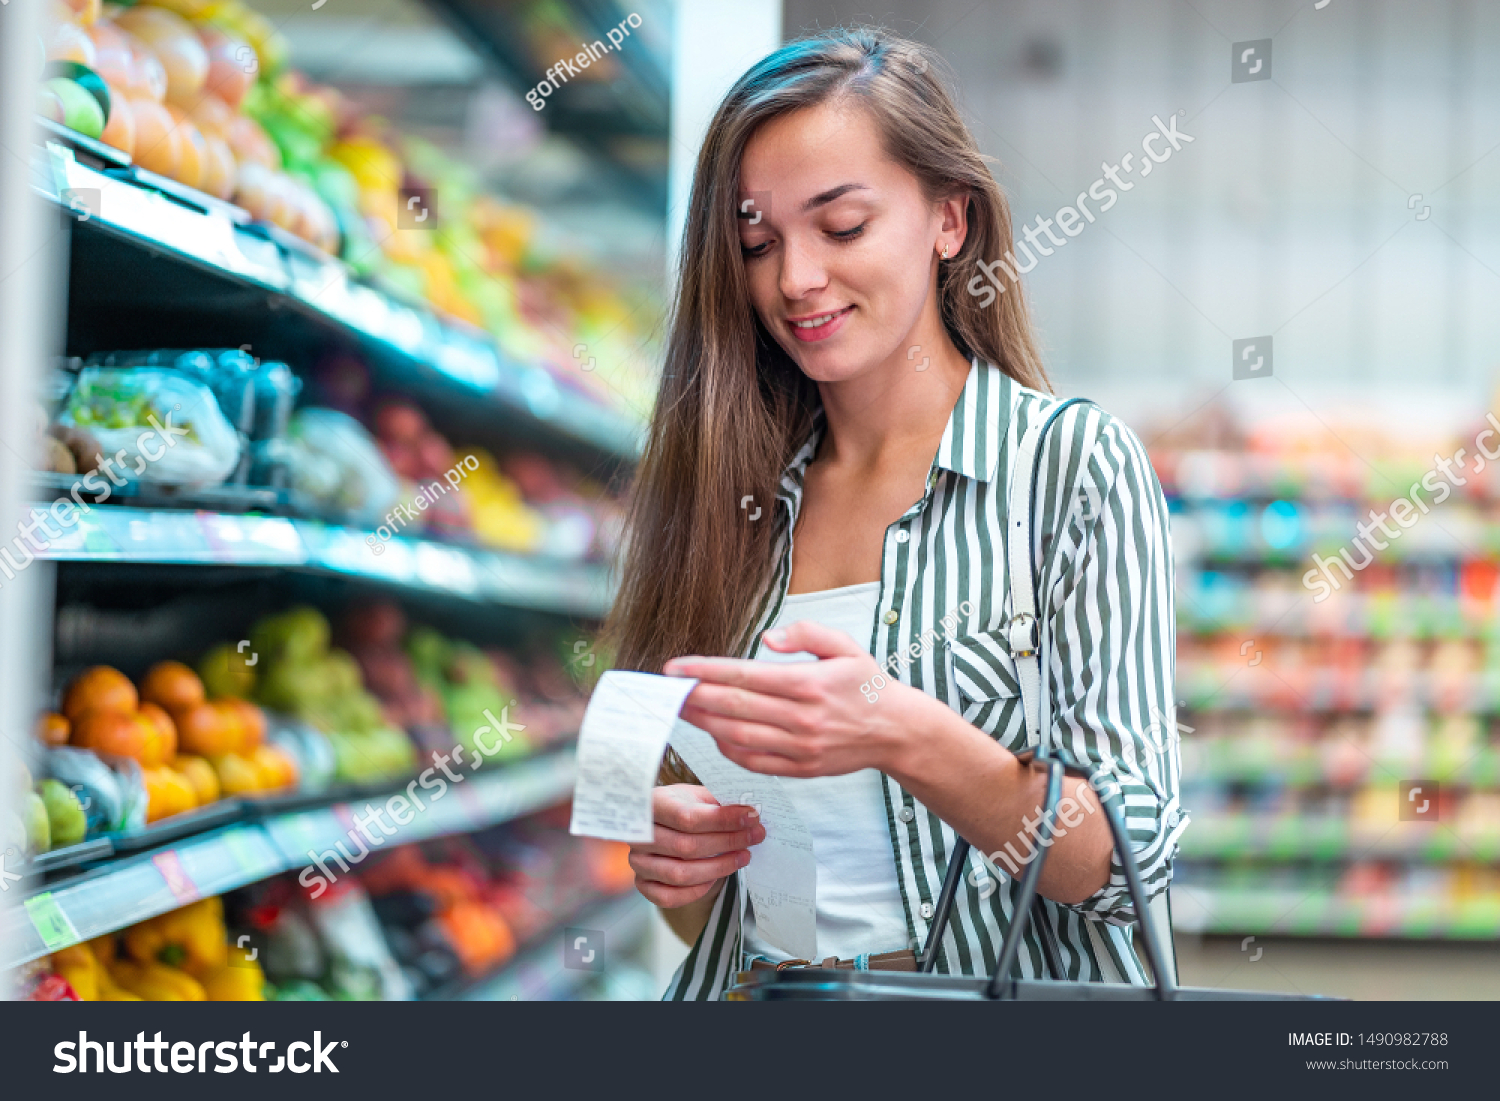 Young woman with shopping basket checks and examines a sales receipt after purchasing food in a grocery store. Customer buying products at supermarket  #1490982788